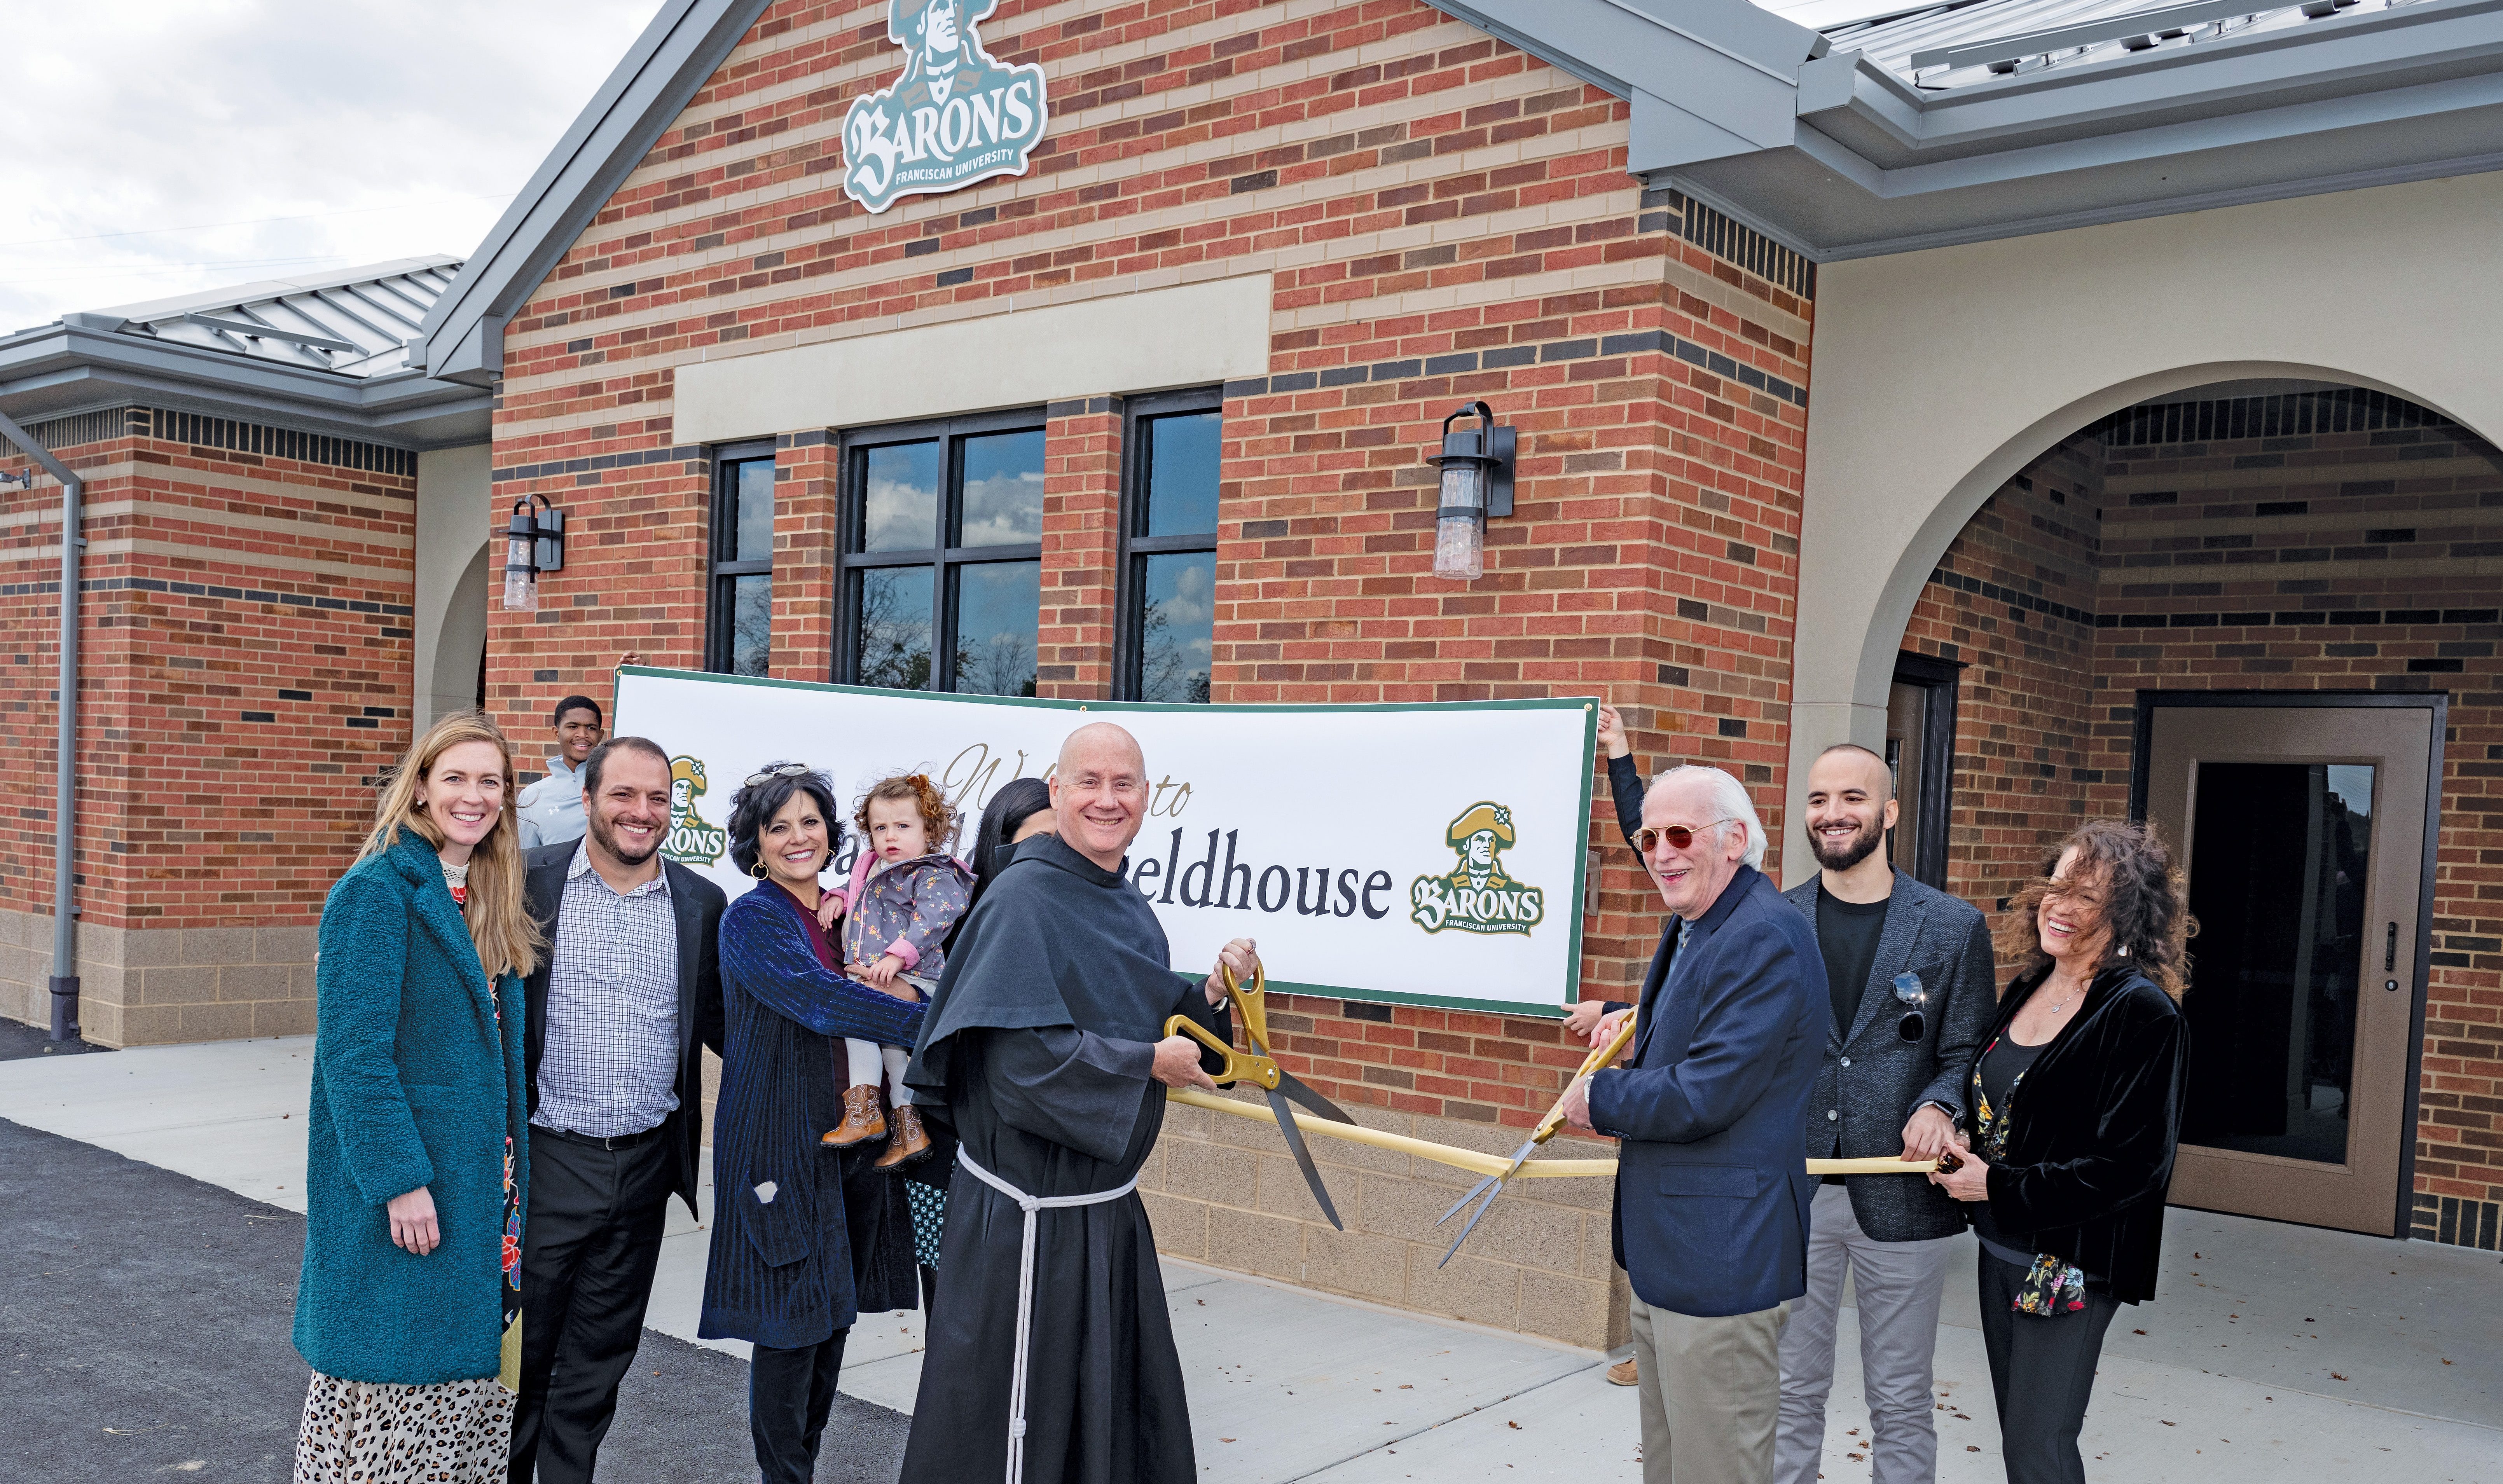 Former trustee Paul Carapellotti and Fr. Dave Pivonka, TOR, do the ribbon-cutting honors surrounded by the Carapellotti family at the new Carapellotti Fieldhouse.